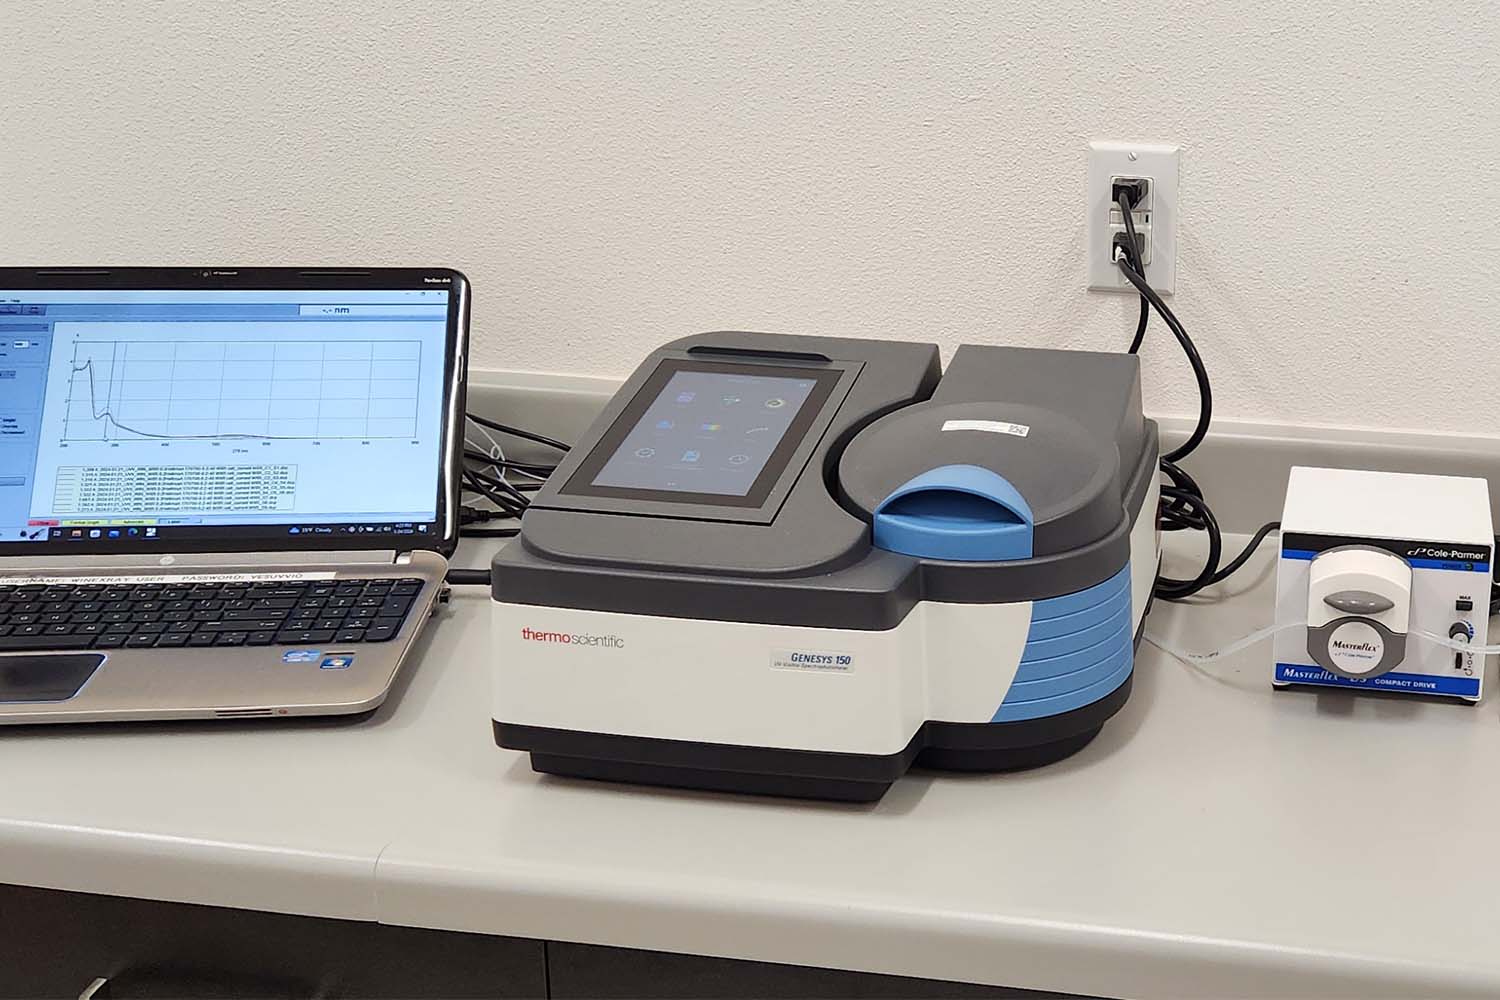 A Thermo Scientific Spectrophotometer